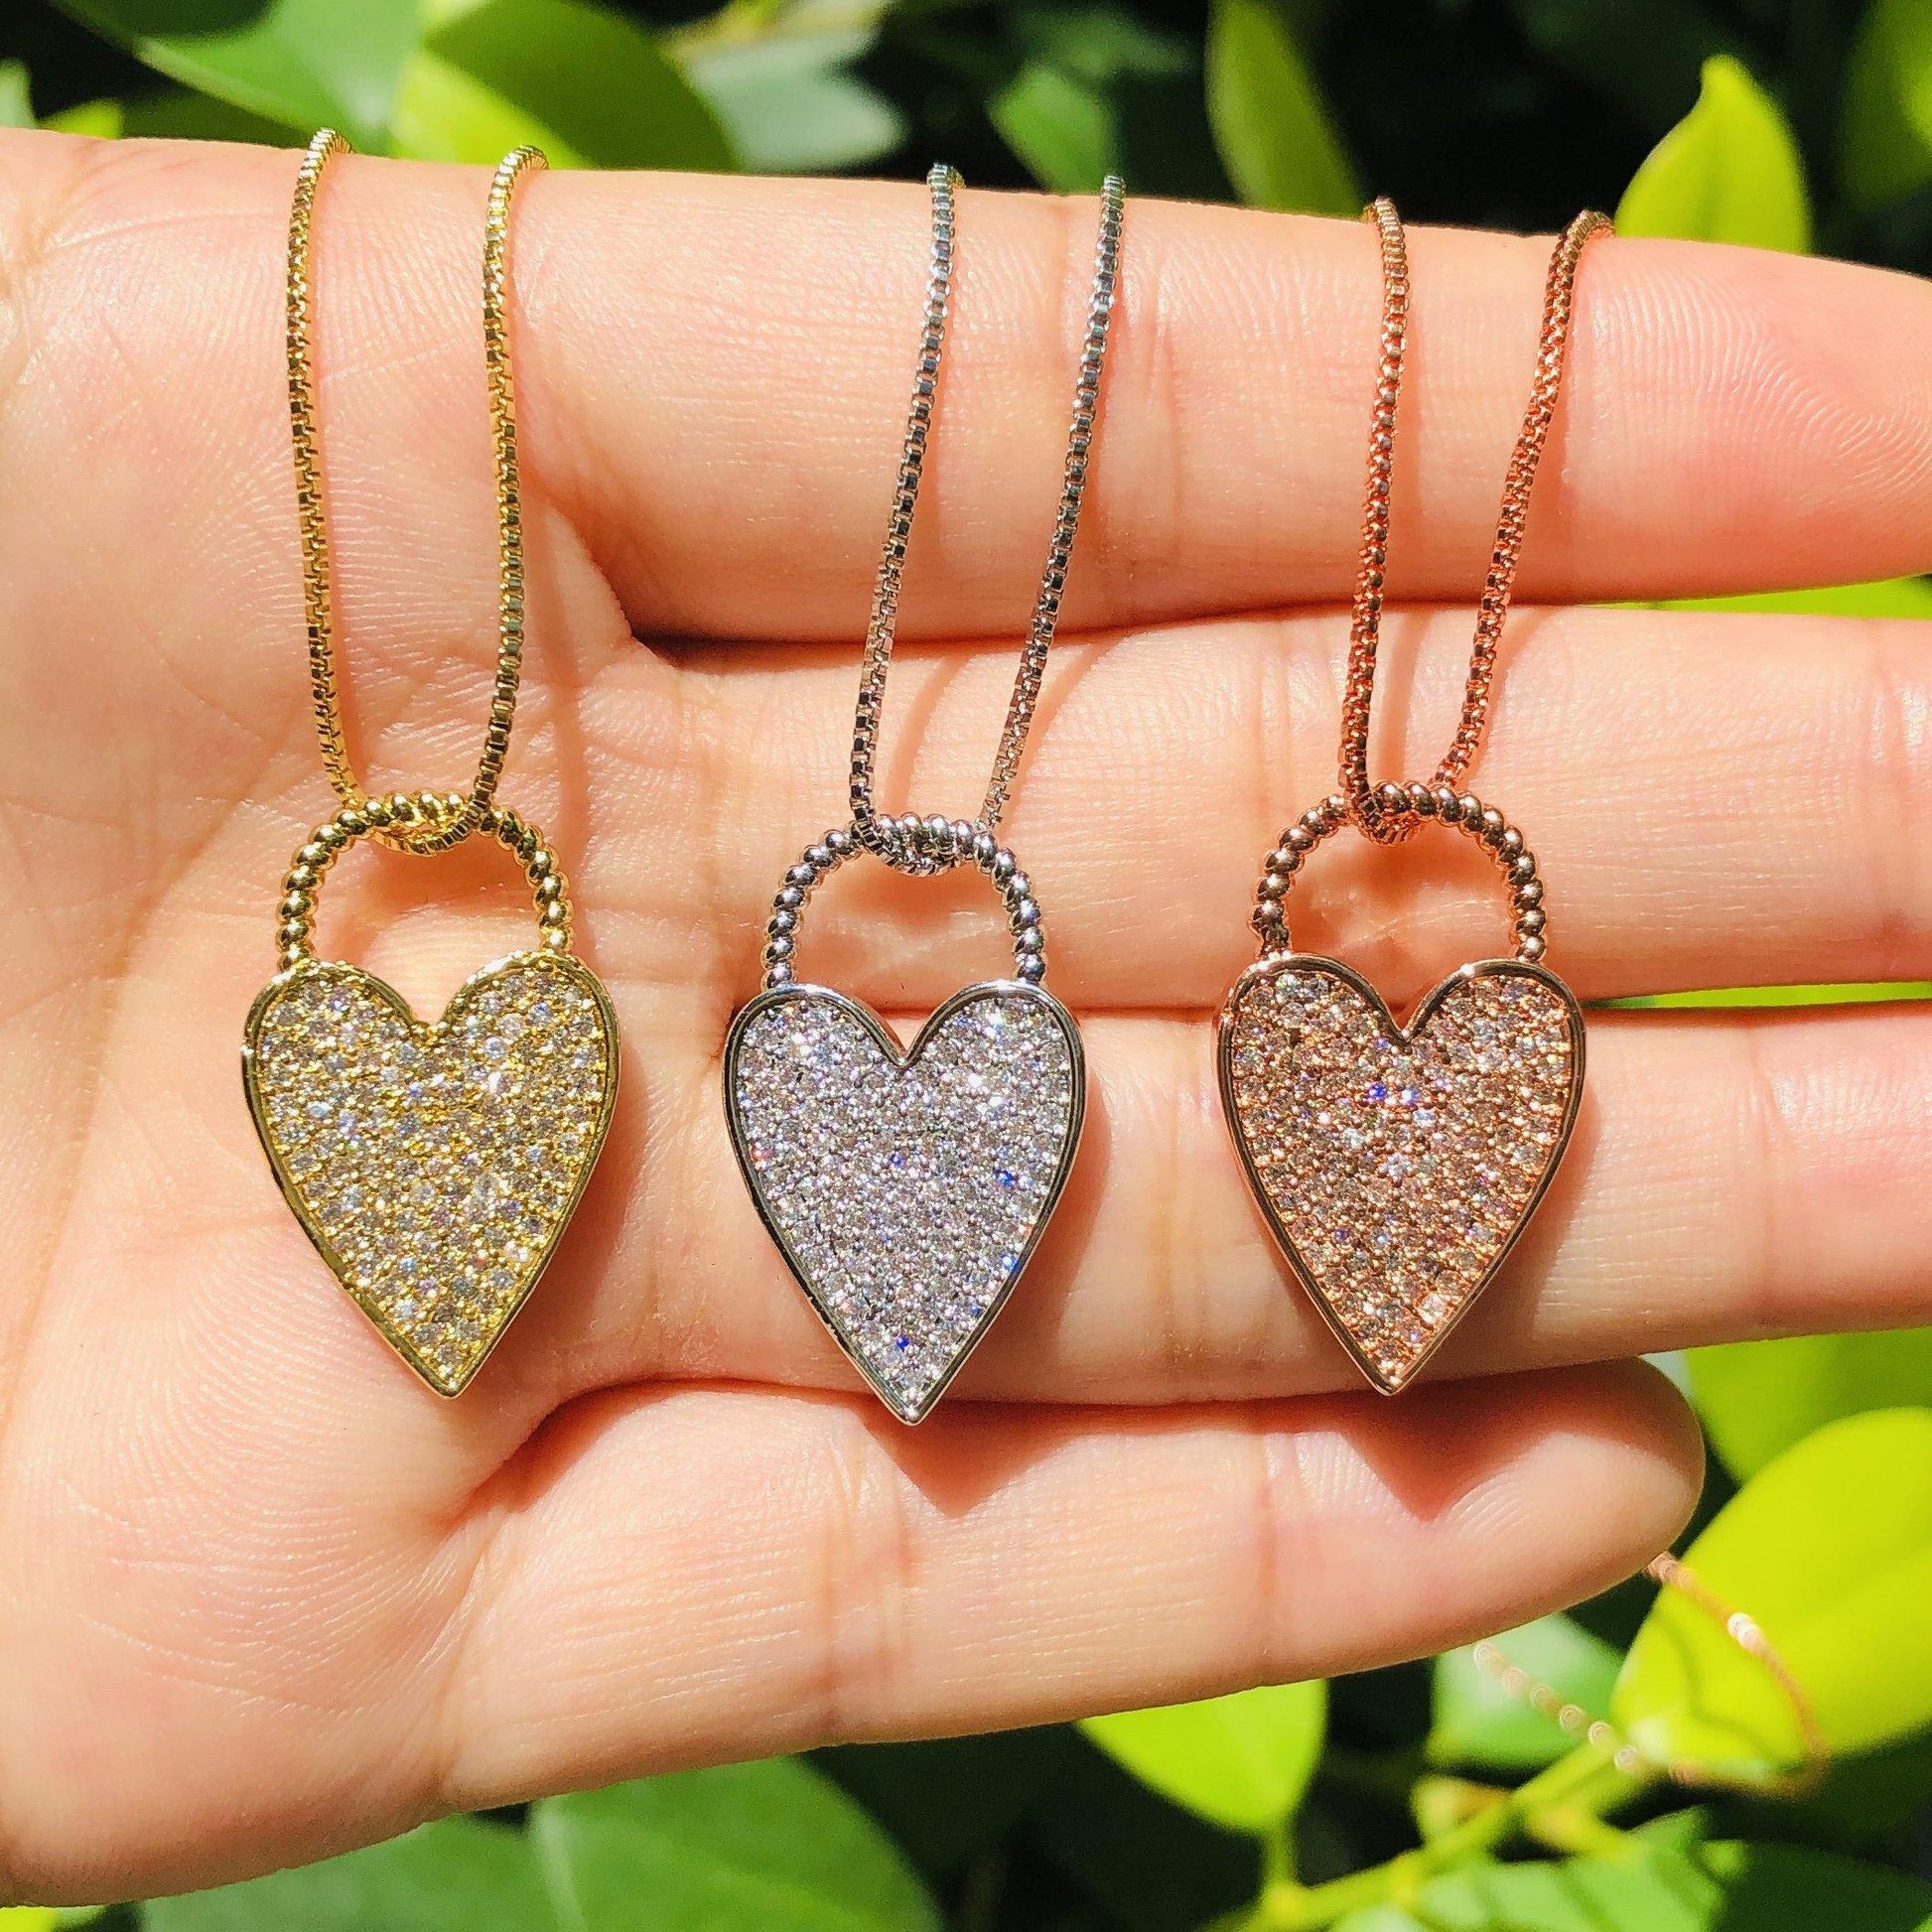 5pcs/lot 23.5*14.5mm CZ Paved Heart Lock Necklaces Necklaces Love & Heart Necklaces Charms Beads Beyond